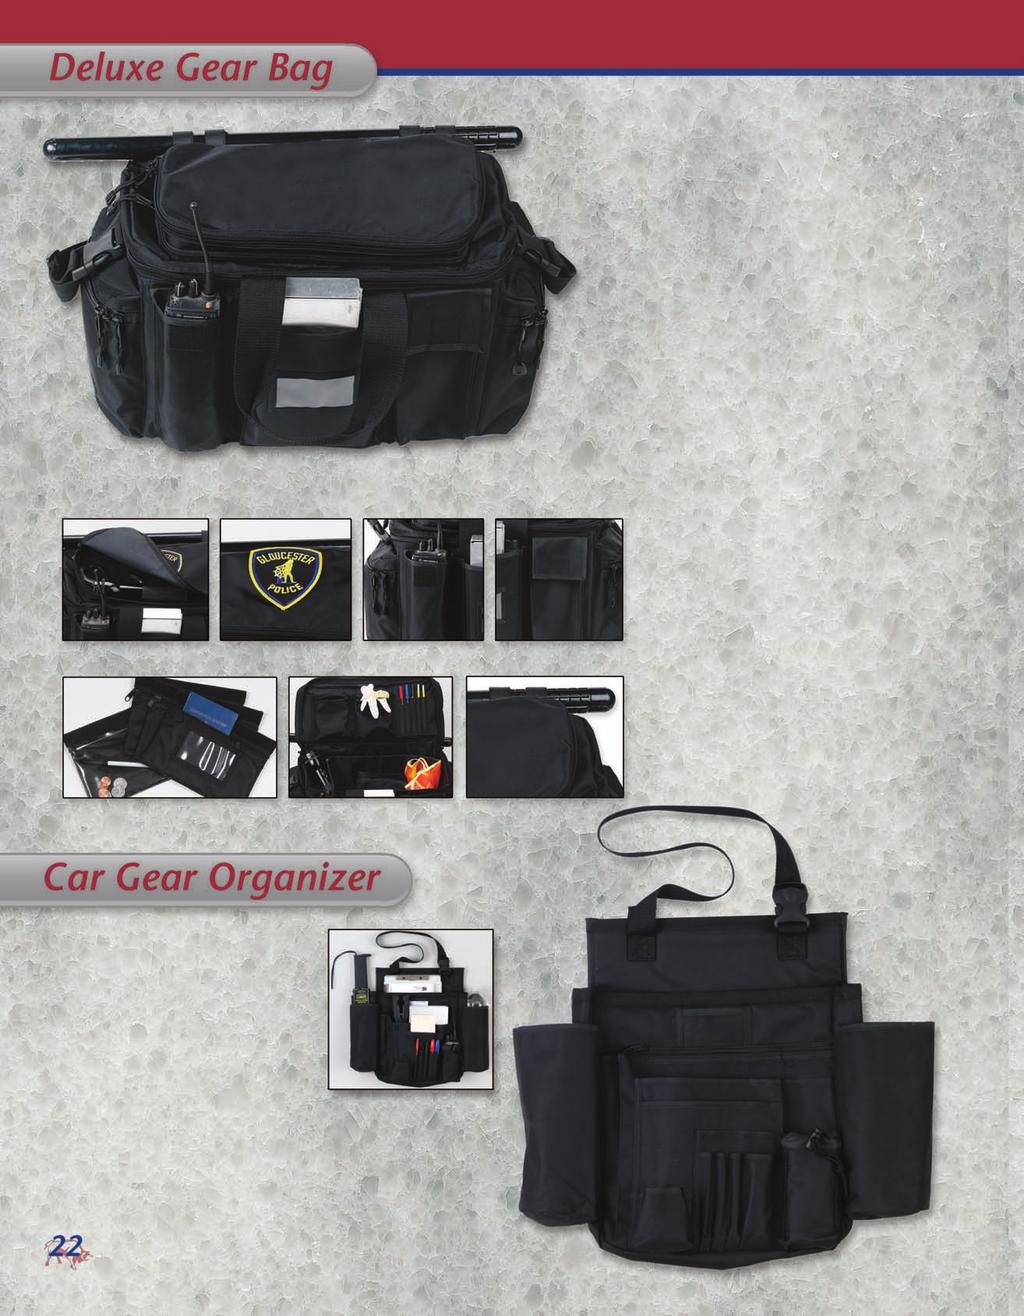 Not your basic gear bag. Our 90700 Deluxe Gear Bag has an easy access top pocket that is perfect for the items you will need in a hurry or on a daily basis.